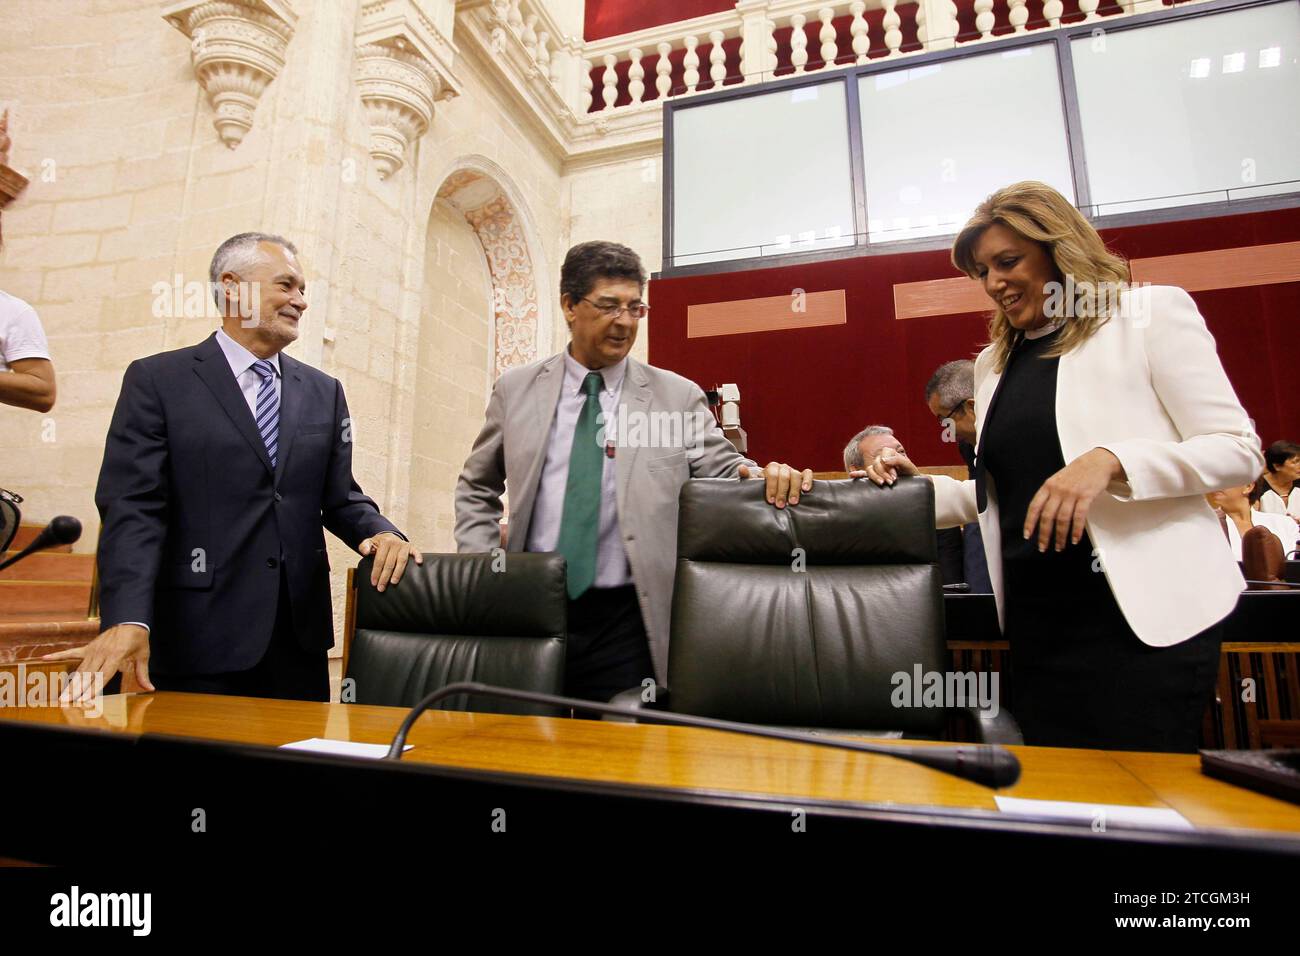 Seville. 4-September-2013. Investiture debate speech by Susana Diaz, the first female president of the Andalusian regional government. In the Image: Jose Antonio Grián, Susana Díaz Pacheco and Diego Valderas. Photo: Raul Doblado. Archsev Raul dubbed. Credit: Album / Archivo ABC / Raúl Doblado Stock Photo